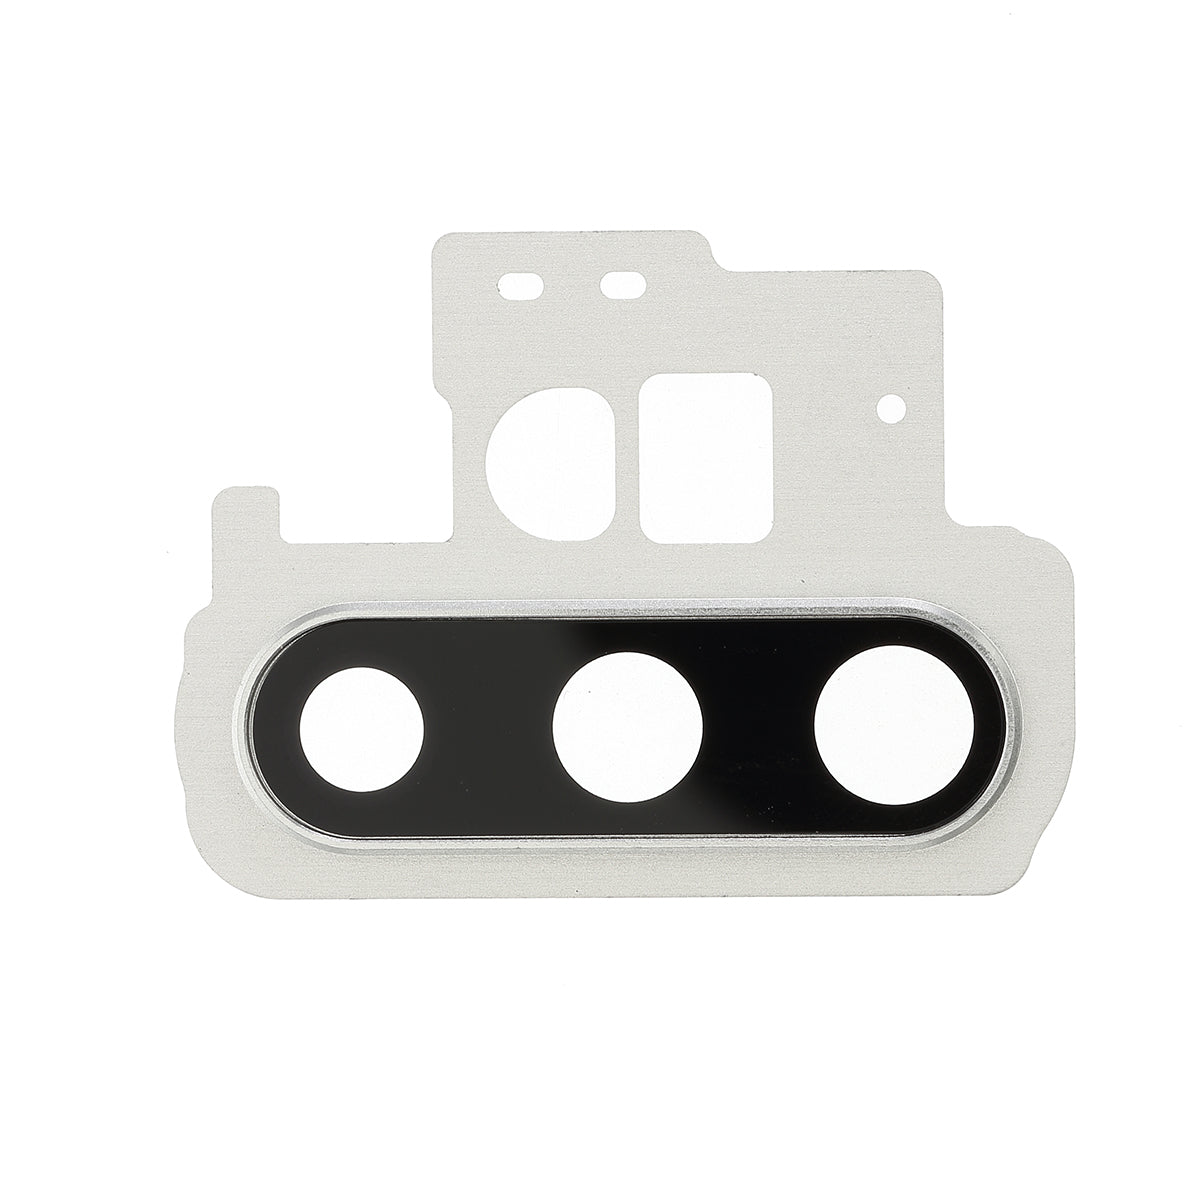 OEM Rear Camera Lens Ring Cover Replacement Part for Samsung Galaxy Note 10 Plus SM-N975 - White